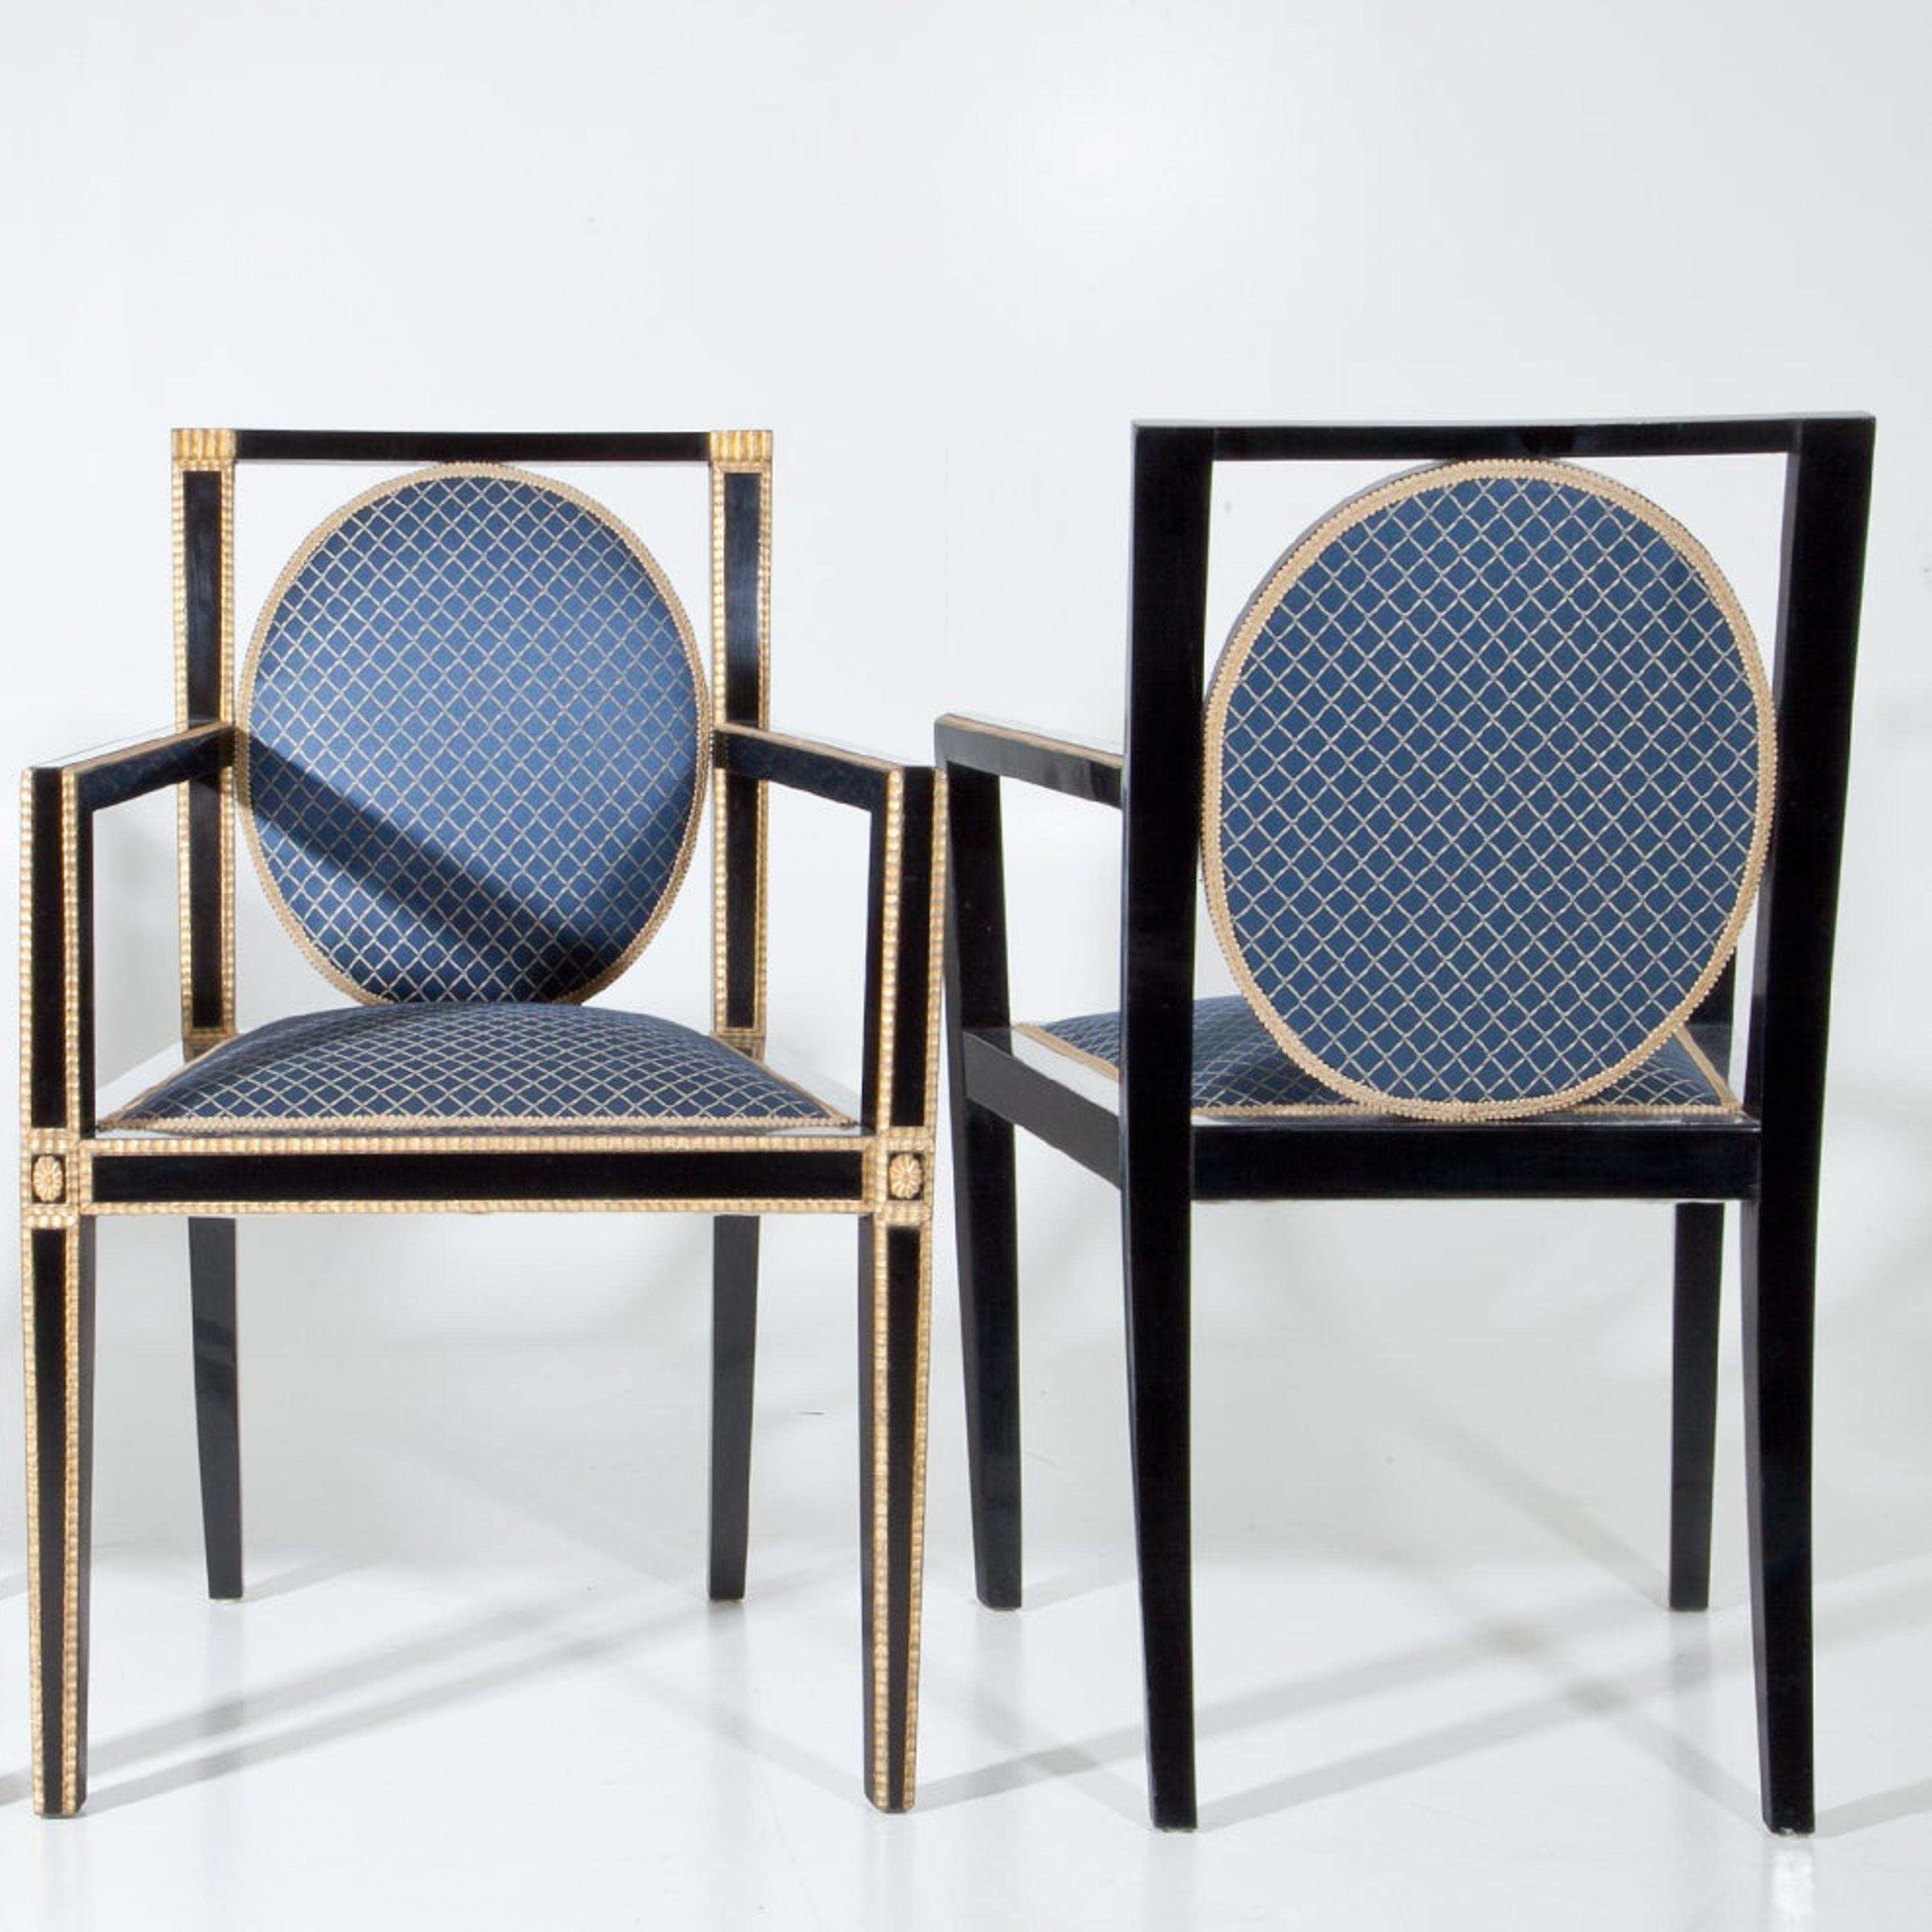 Pair o ebonized armchairs of the Viennese Secession with gilt wavy moldings around the legs, armrests and backrests. These show an upholstered medallion-shaped back framed by black stiles and rails. The blue upholstery with gold rhomboid pattern is